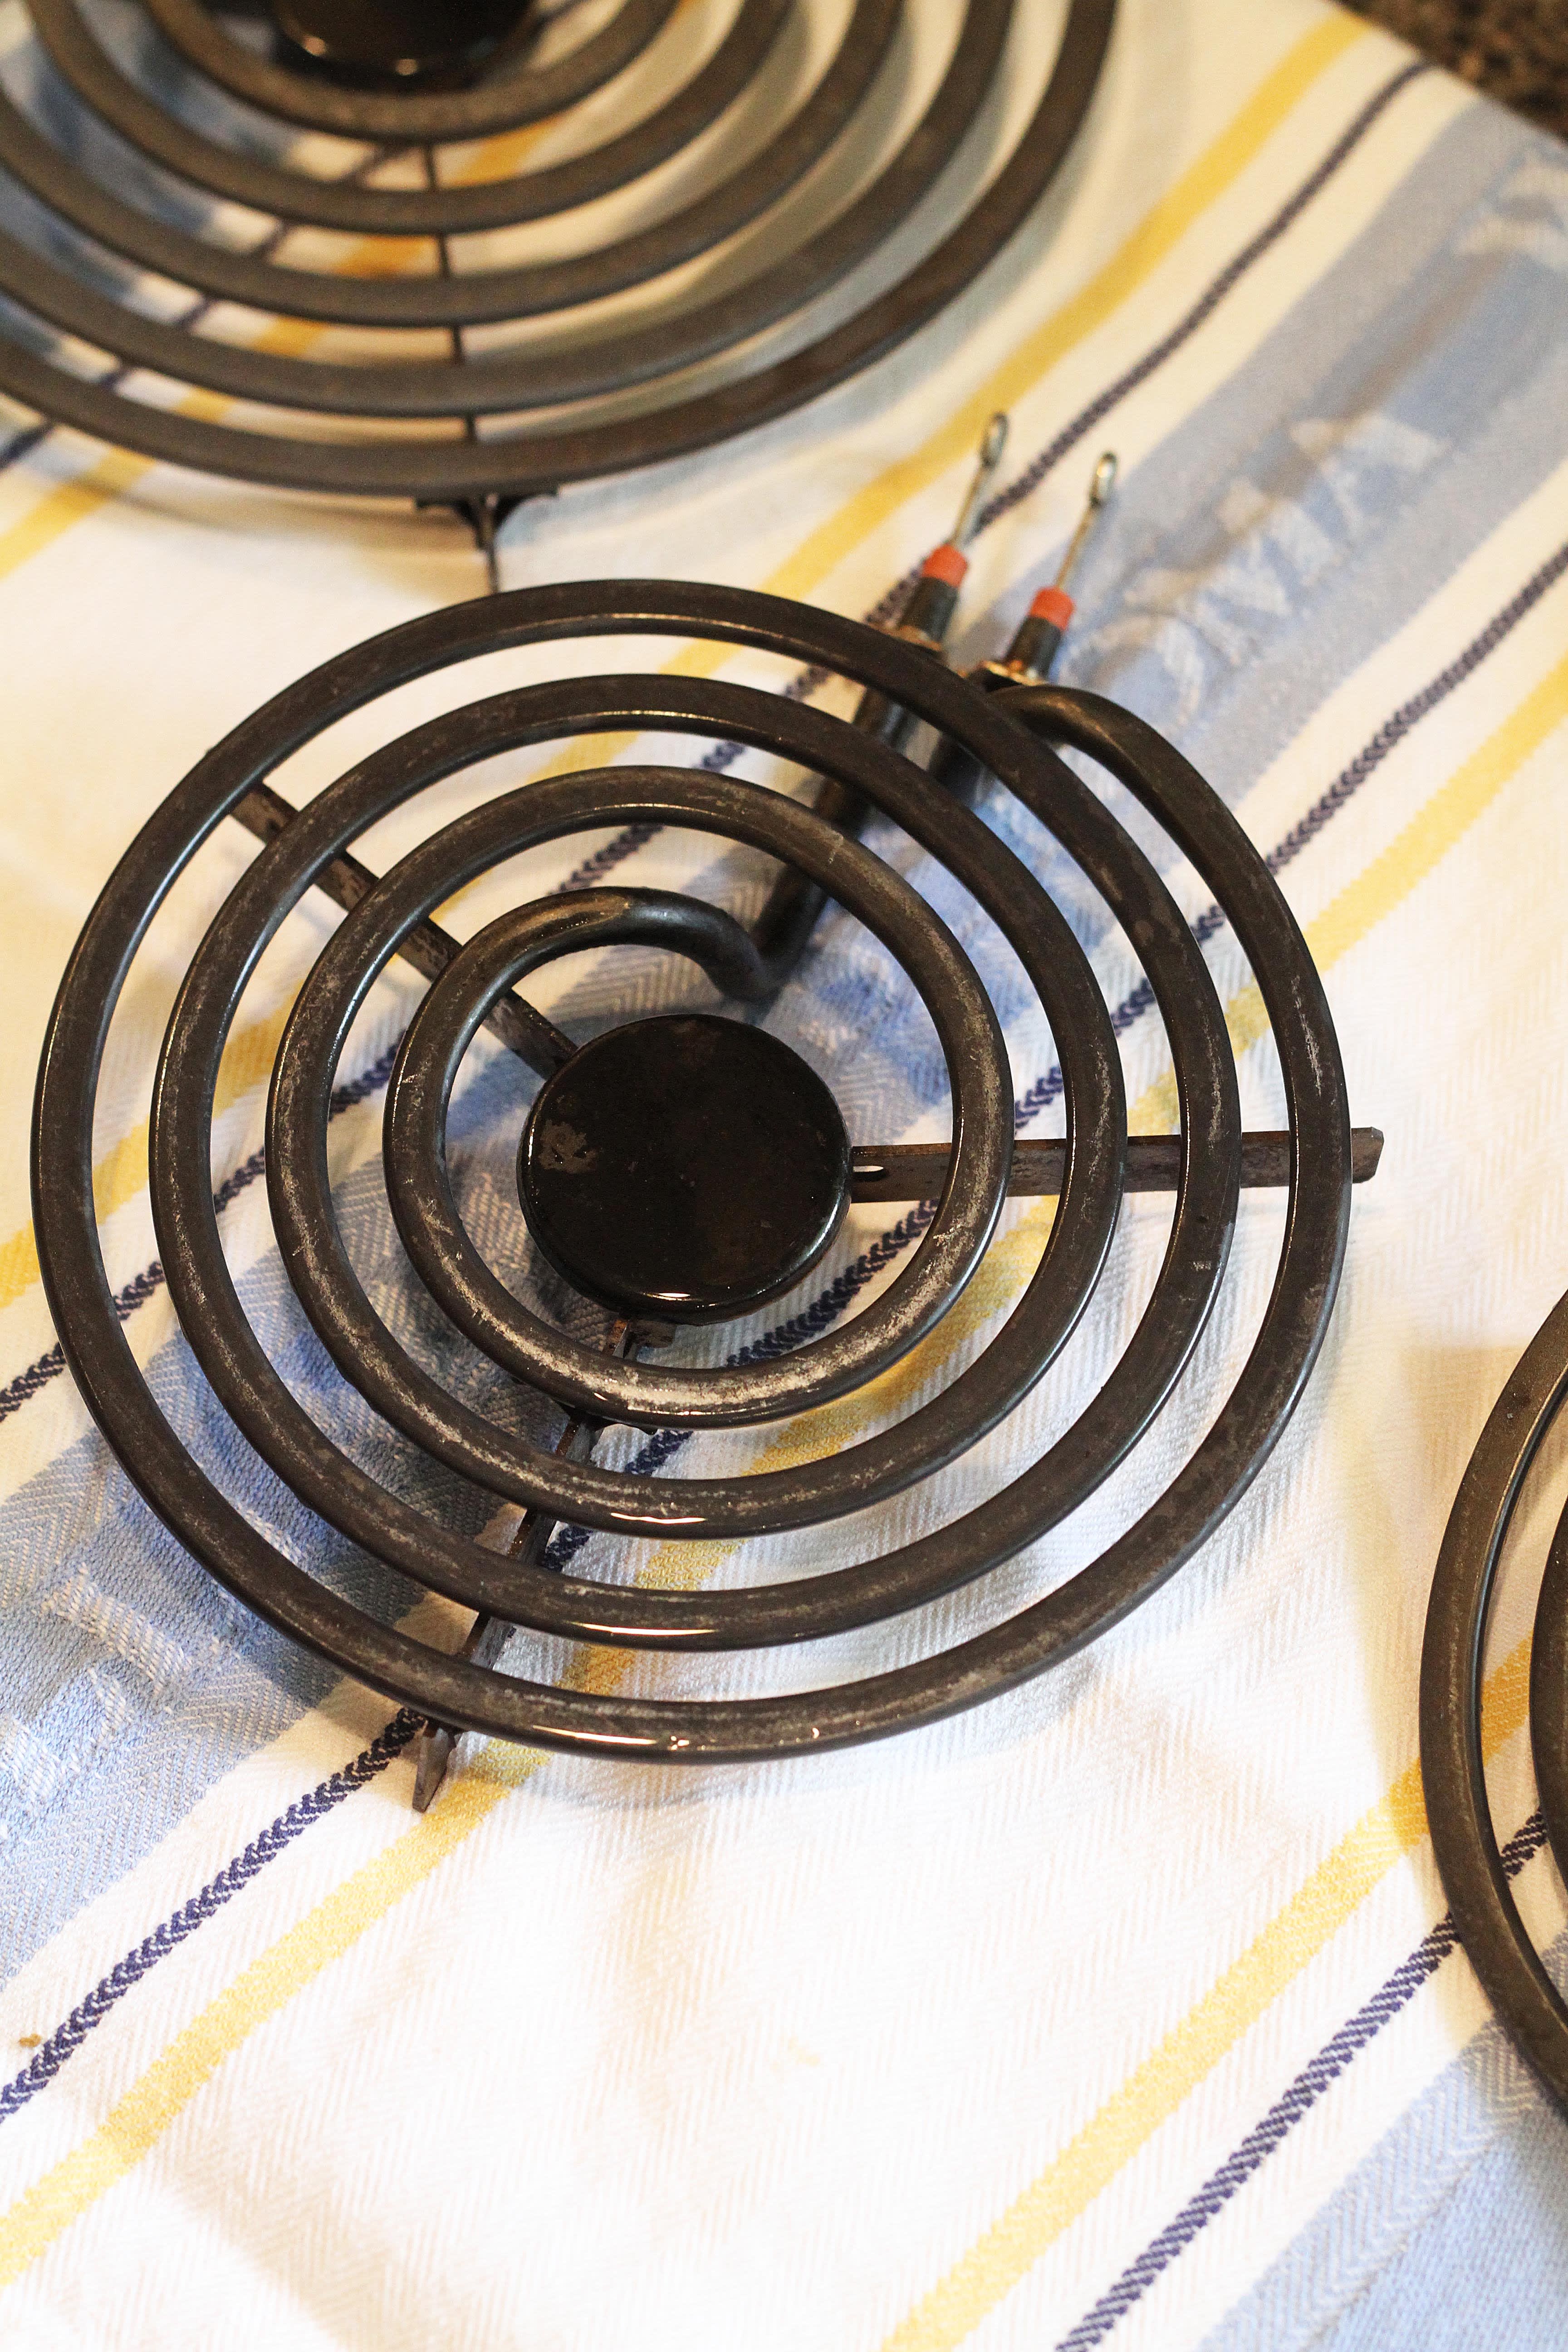 How to Remove Electric Stove Burners